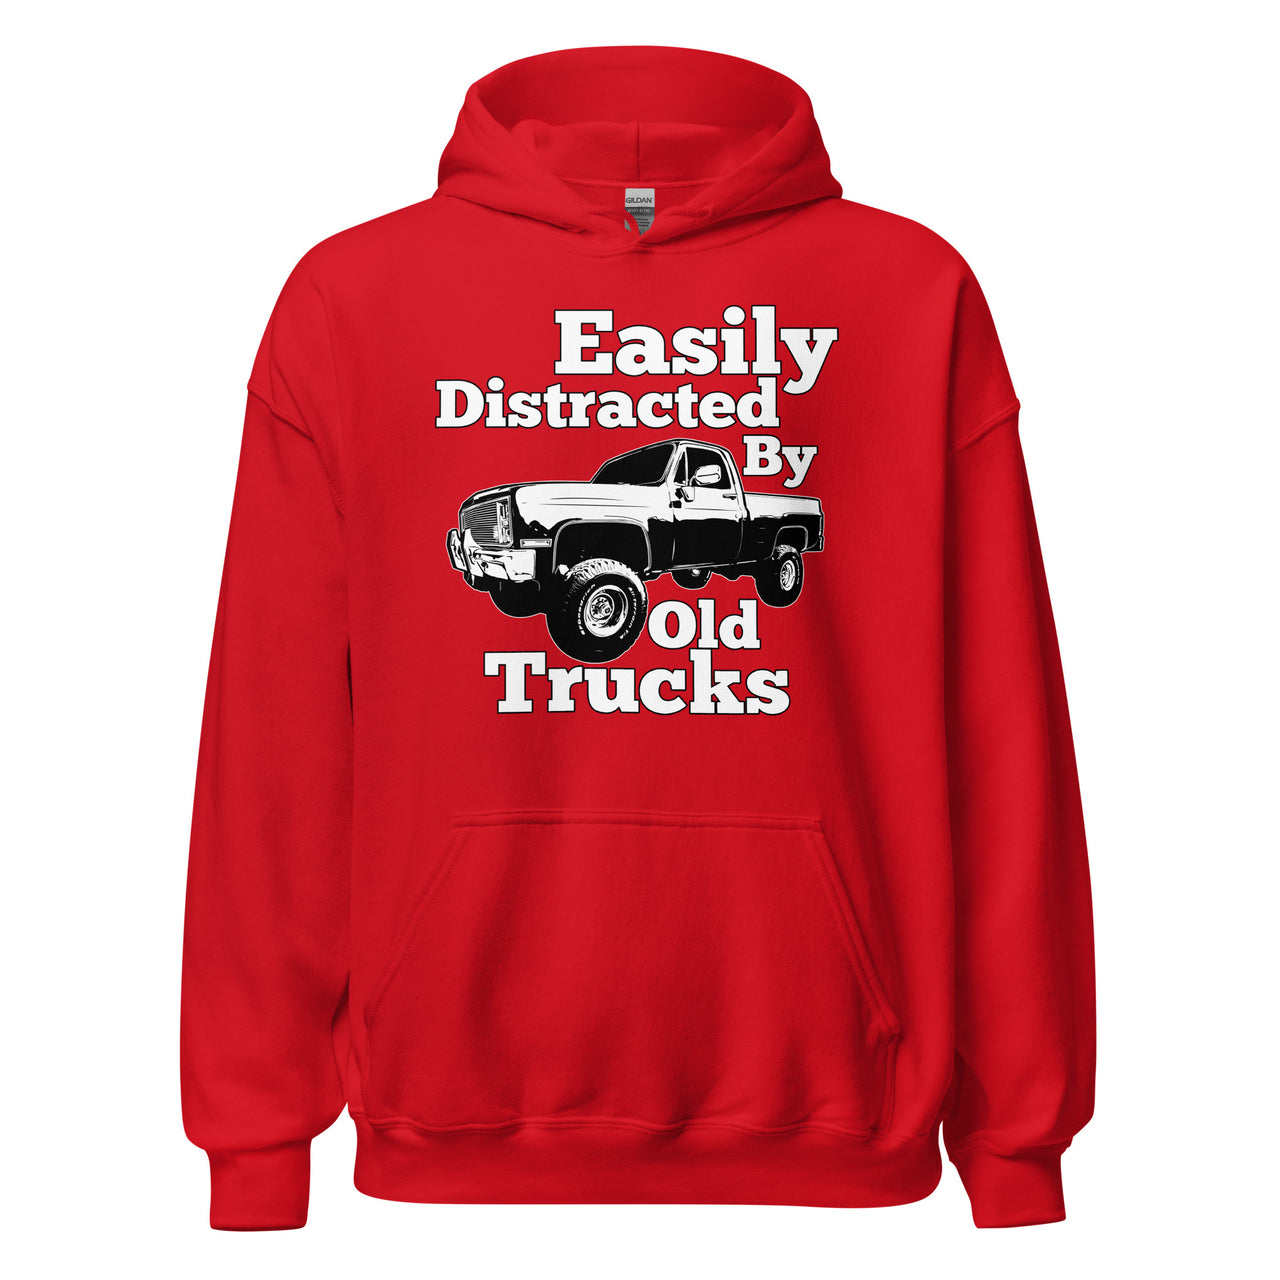 red Square Body Truck Hoodie Sweatshirt - Easily Distracted By Old Trucks